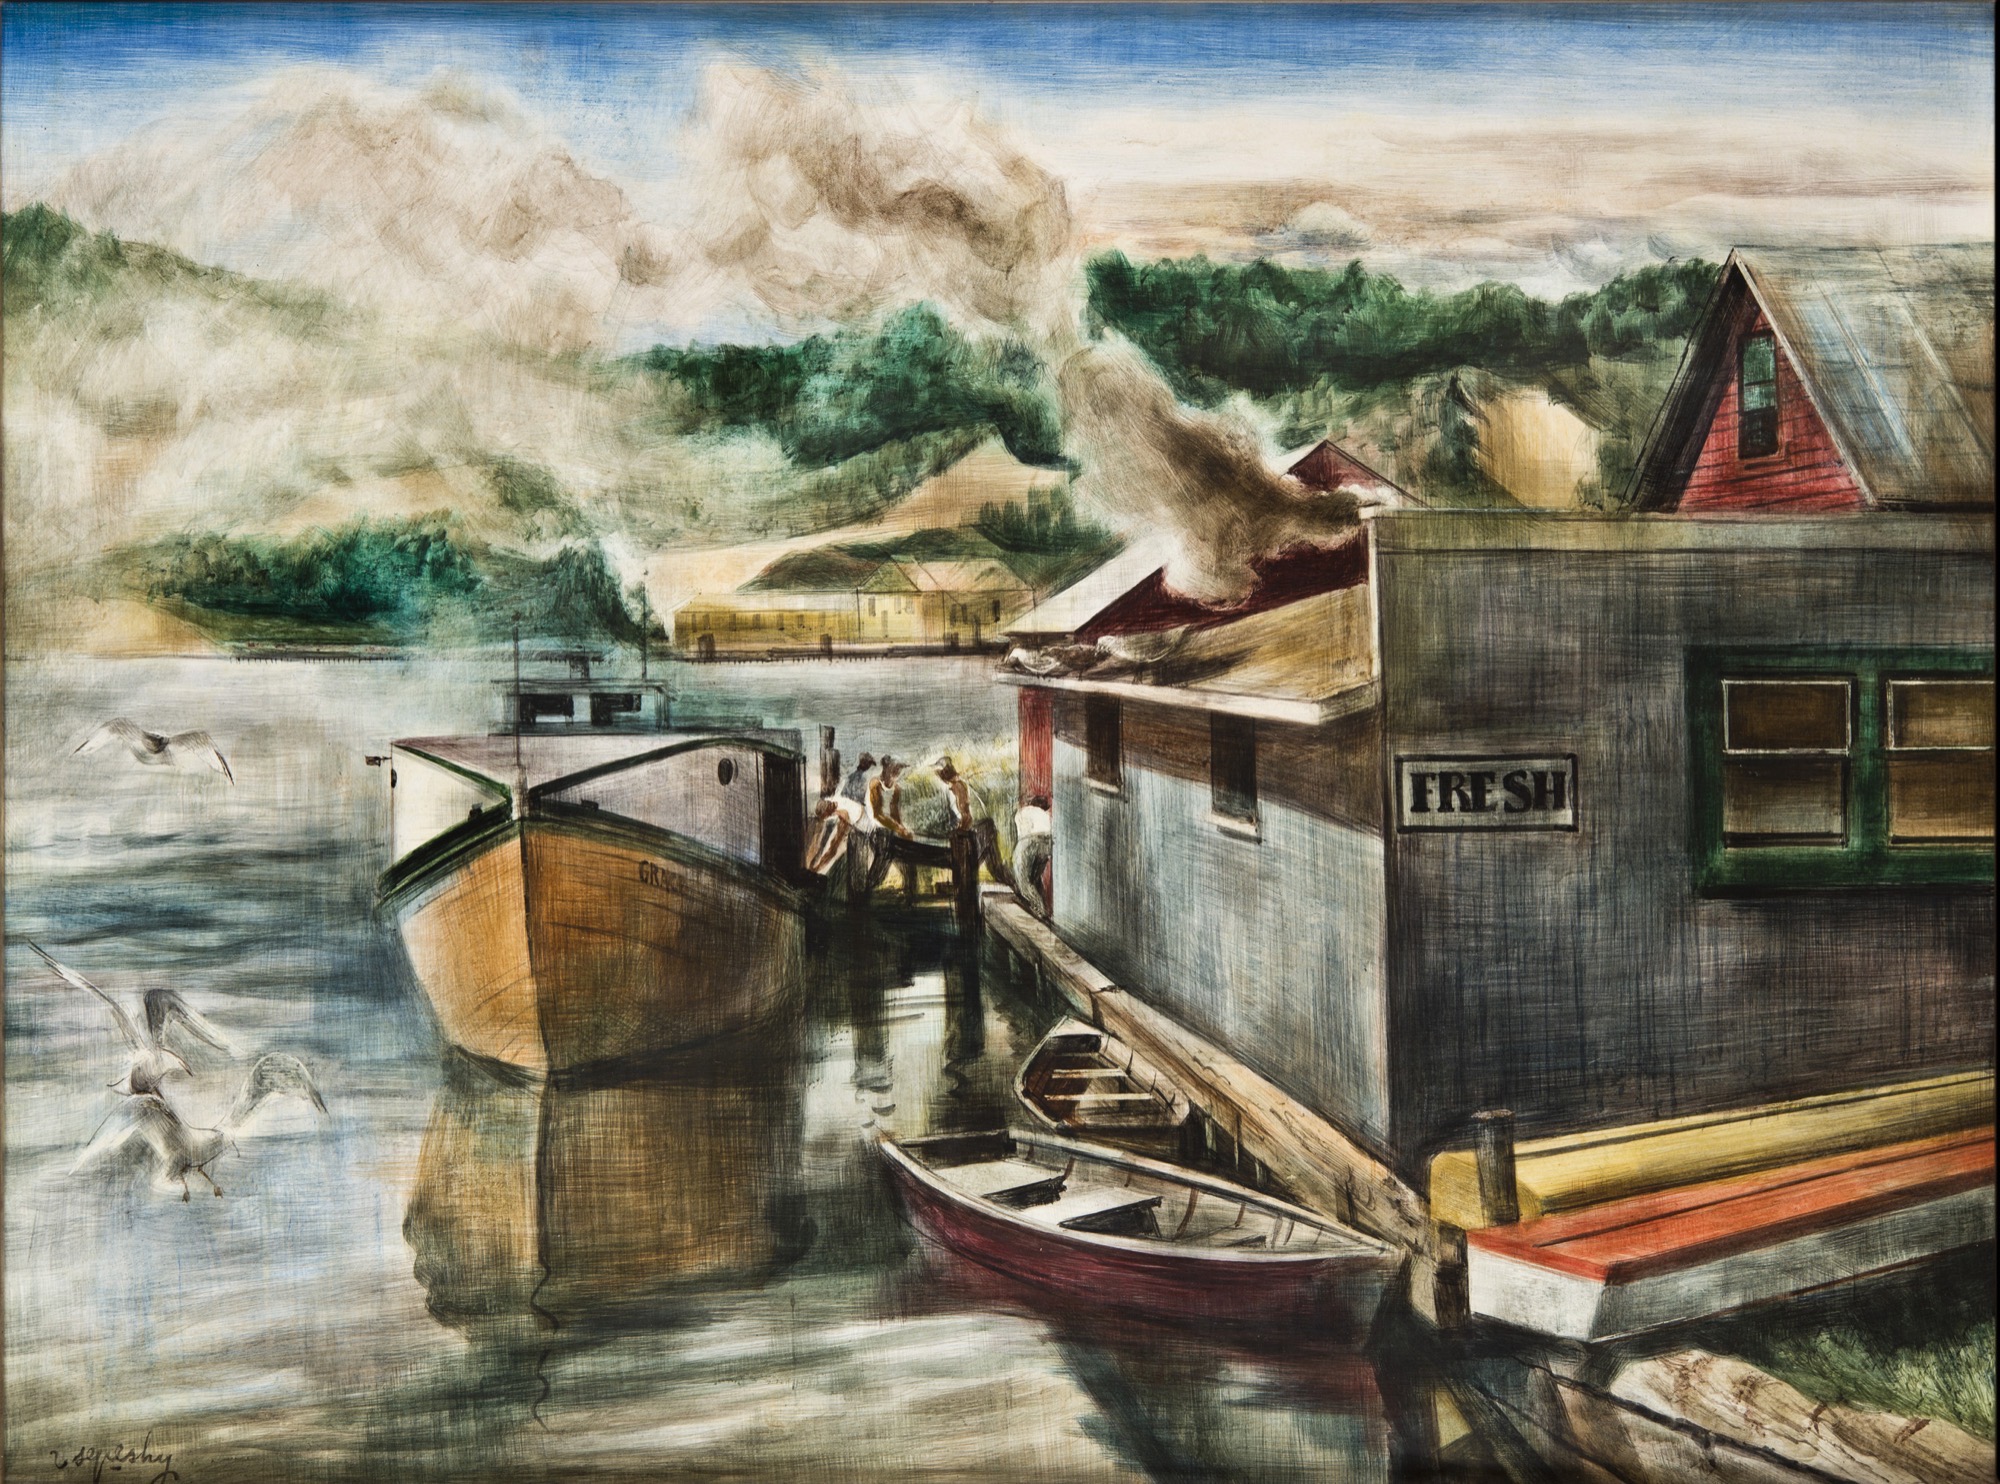 This Tempera work depicts a water scene. A boat is tied up to a dock and there are people on the dock sitting. It is reminiscant of a sea town and sea scape with seagulls in the foreground.